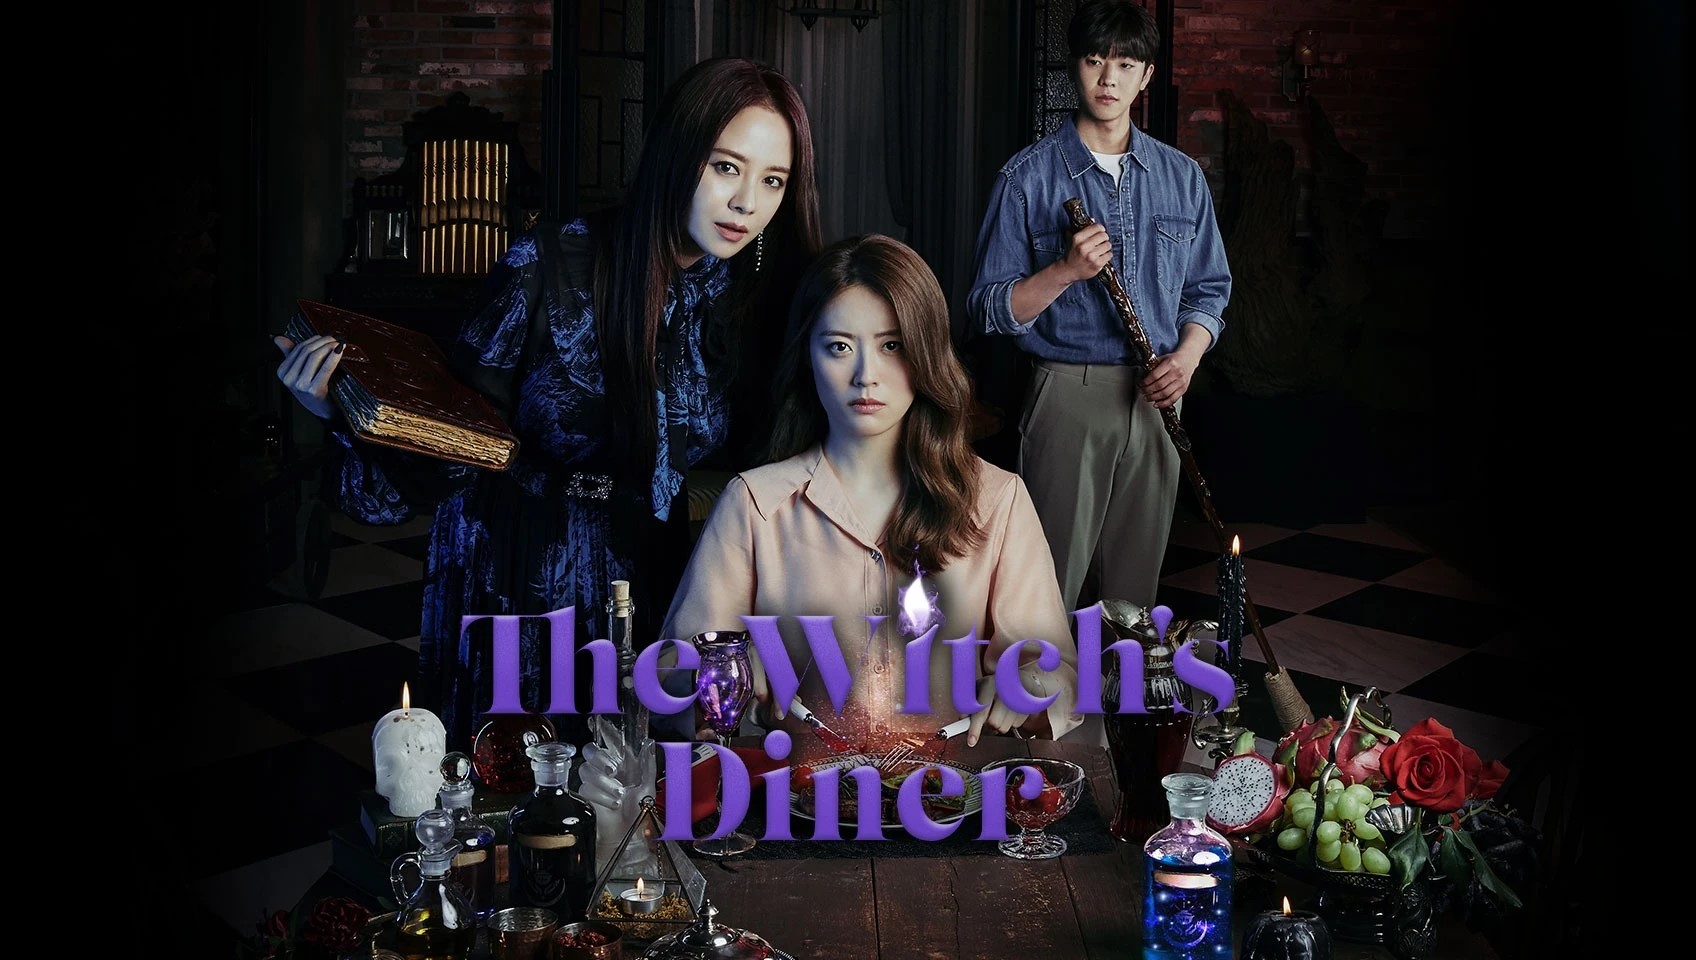 Poster phim The Witch's Diner (Ảnh: Internet)